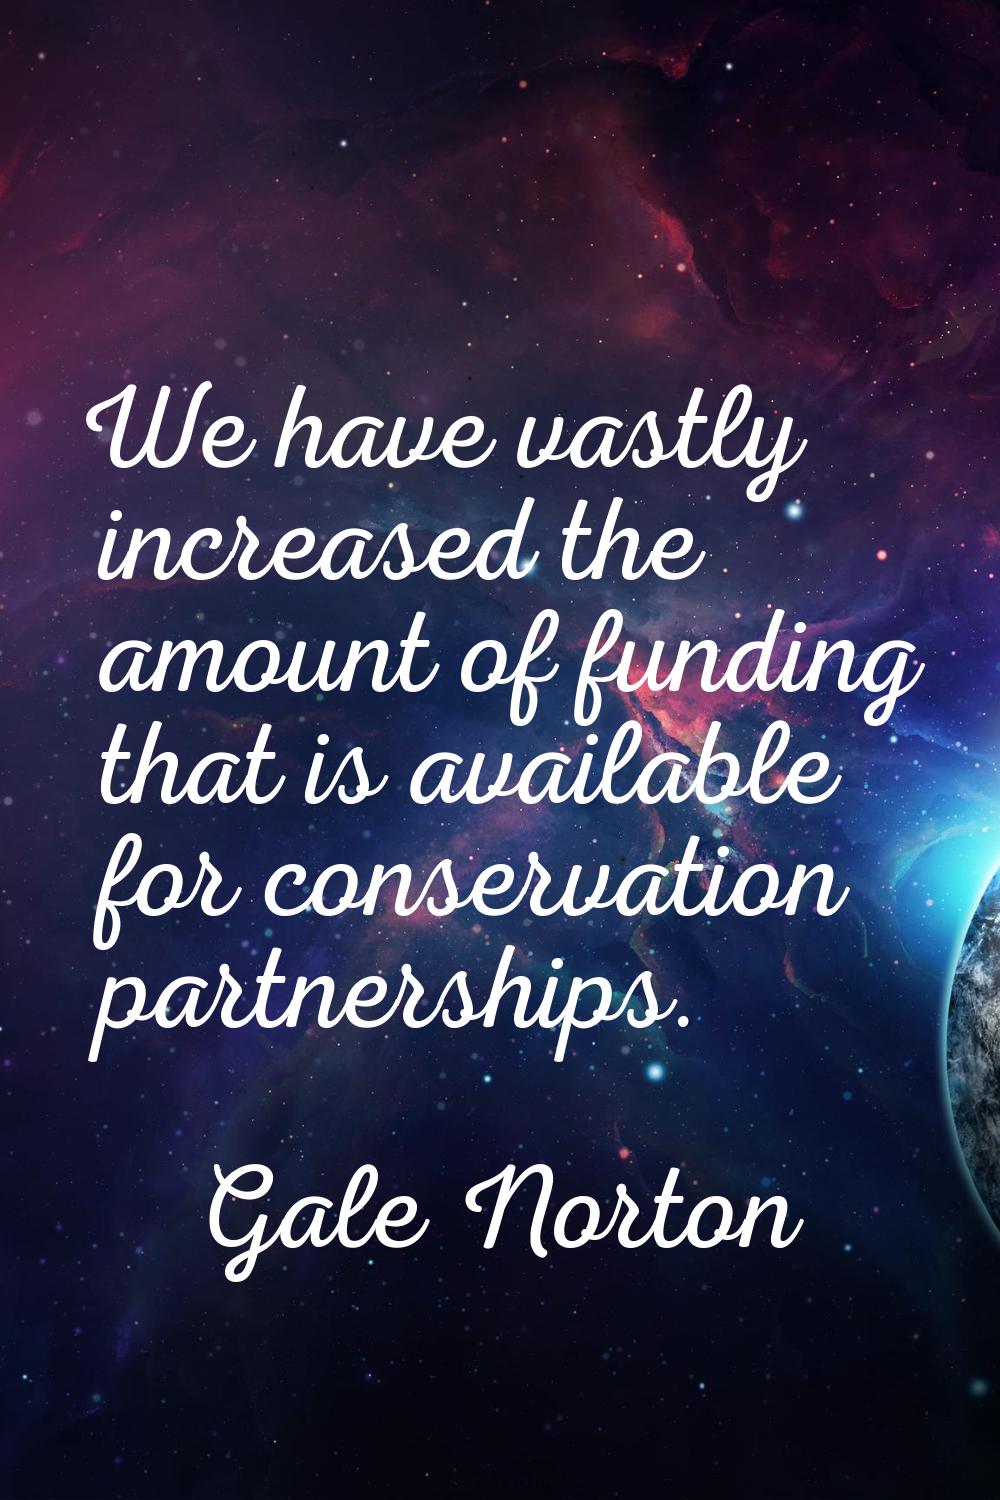 We have vastly increased the amount of funding that is available for conservation partnerships.